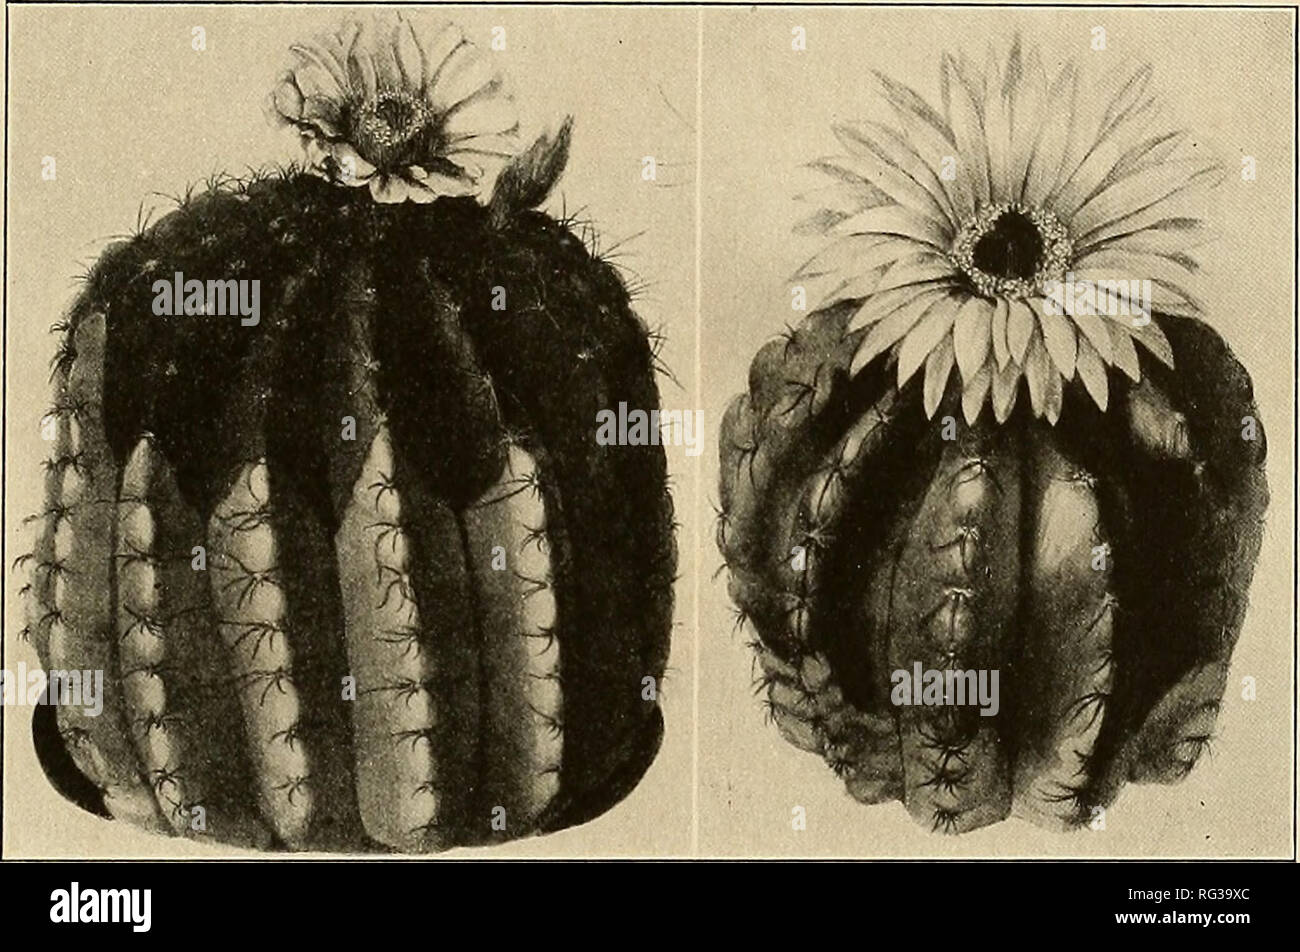 . The Cactaceae : descriptions and illustrations of plants of the cactus family. MALACOCARPUS. 195 We know this species from description and illustration only. Illustration: Martius, Fl. Bras. 42: pi. 50, f. 2, as Echinocactus muricatus. Figure 207 is copied from the illustration above cited. 13. Malacocarpus linkii (Lehmann). Cactus linkii Lehmann, Ind. Sem. Hamburg 16. 1827. Echinocactus linkii Pfeiffer, Enum. Cact. 48. 1837. Oval to short-cylindric, 7 to 15 cm. high; ribs 13, obtuse; areoles somewhat sunken into the ribs, 8 mm. apart; spines weak, spreading; radial spines 10 to 12, white wi Stock Photo